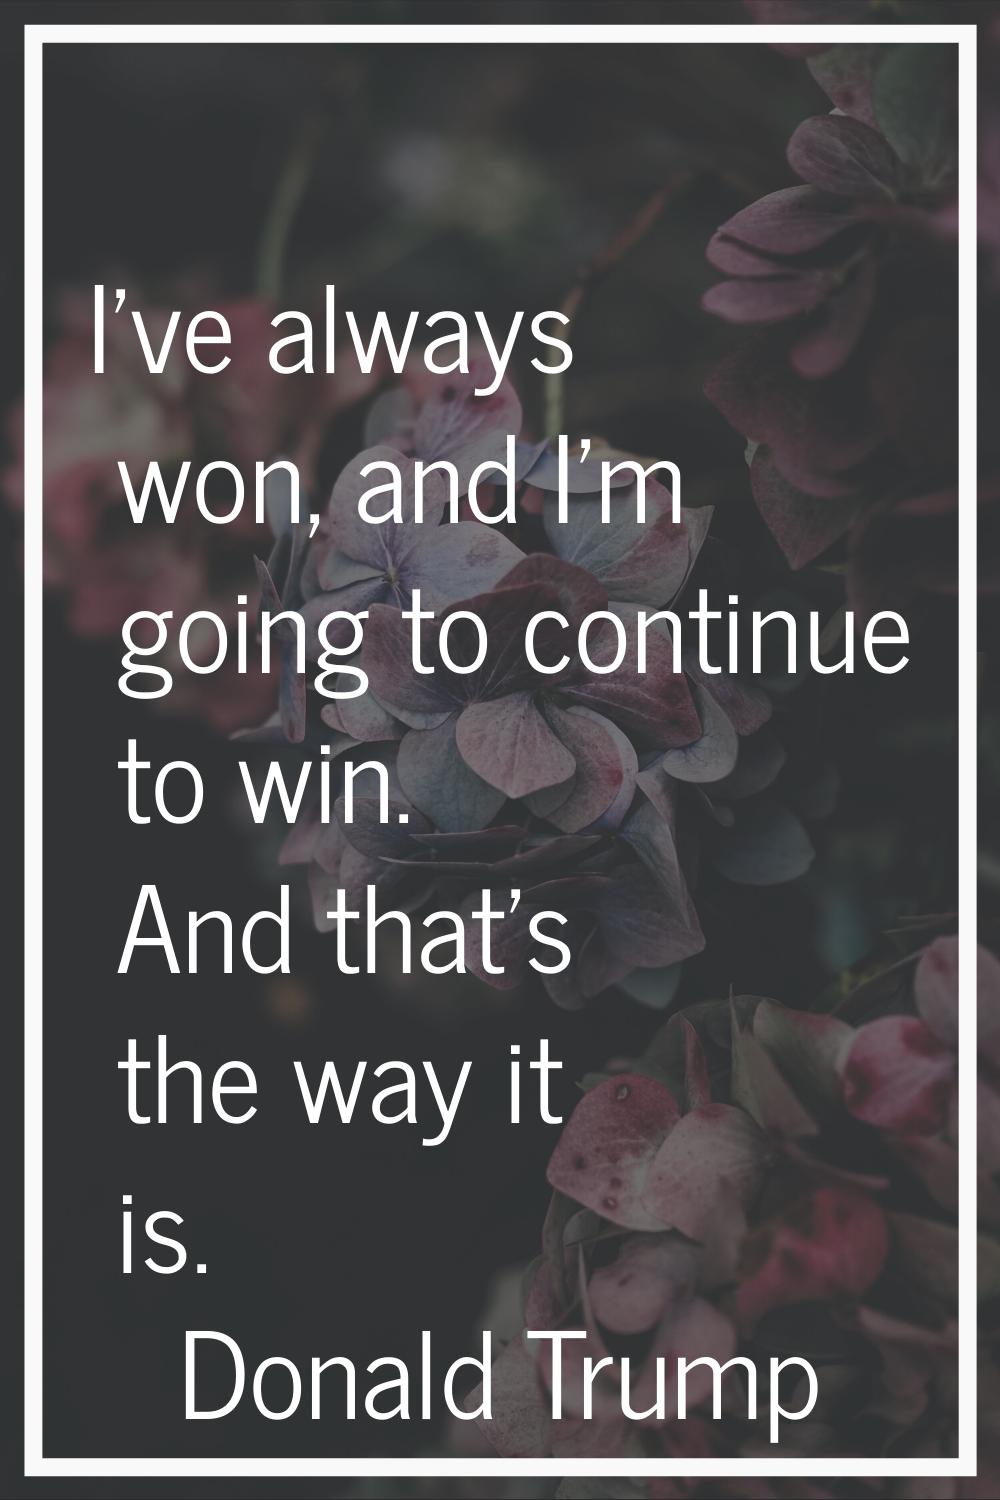 I've always won, and I'm going to continue to win. And that's the way it is.